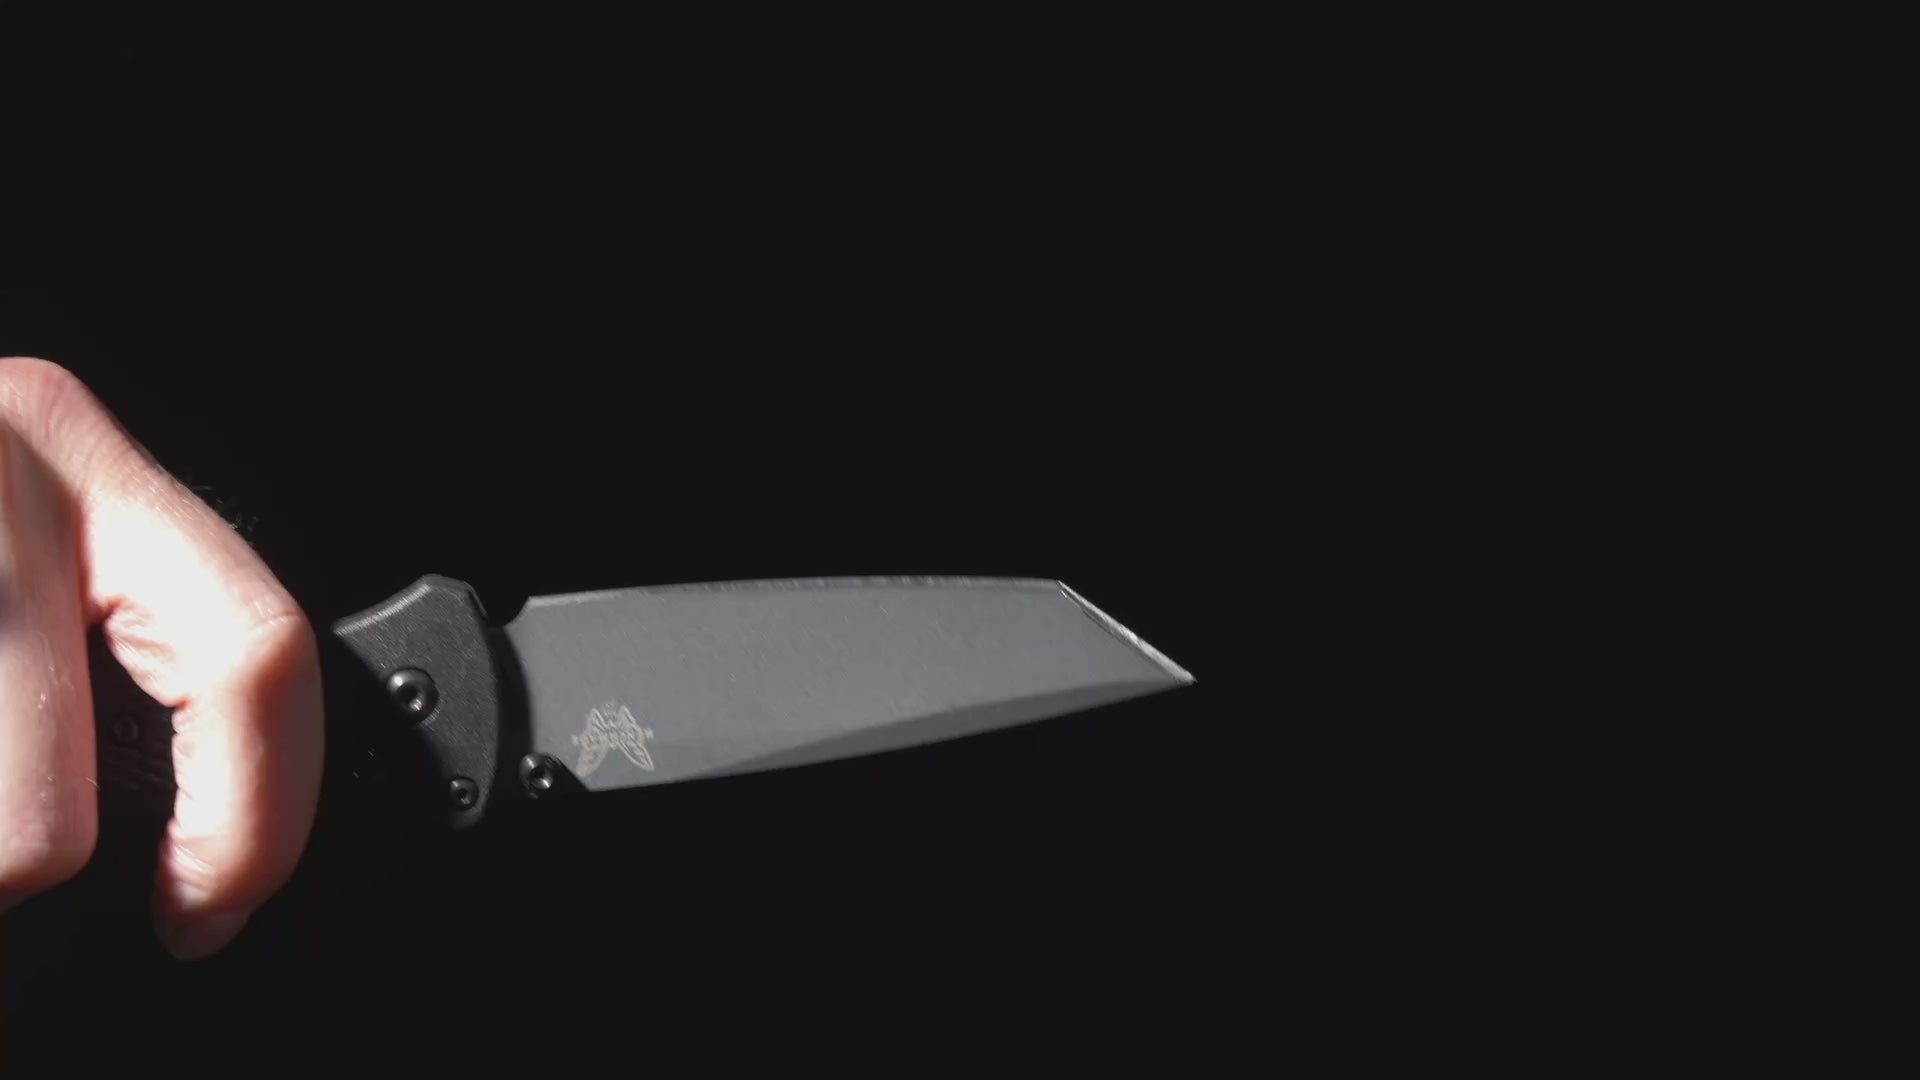 Wicked Edge WE66 Obsidian Micro-Adjustable Precision Sharpener, No Base -  KnifeCenter